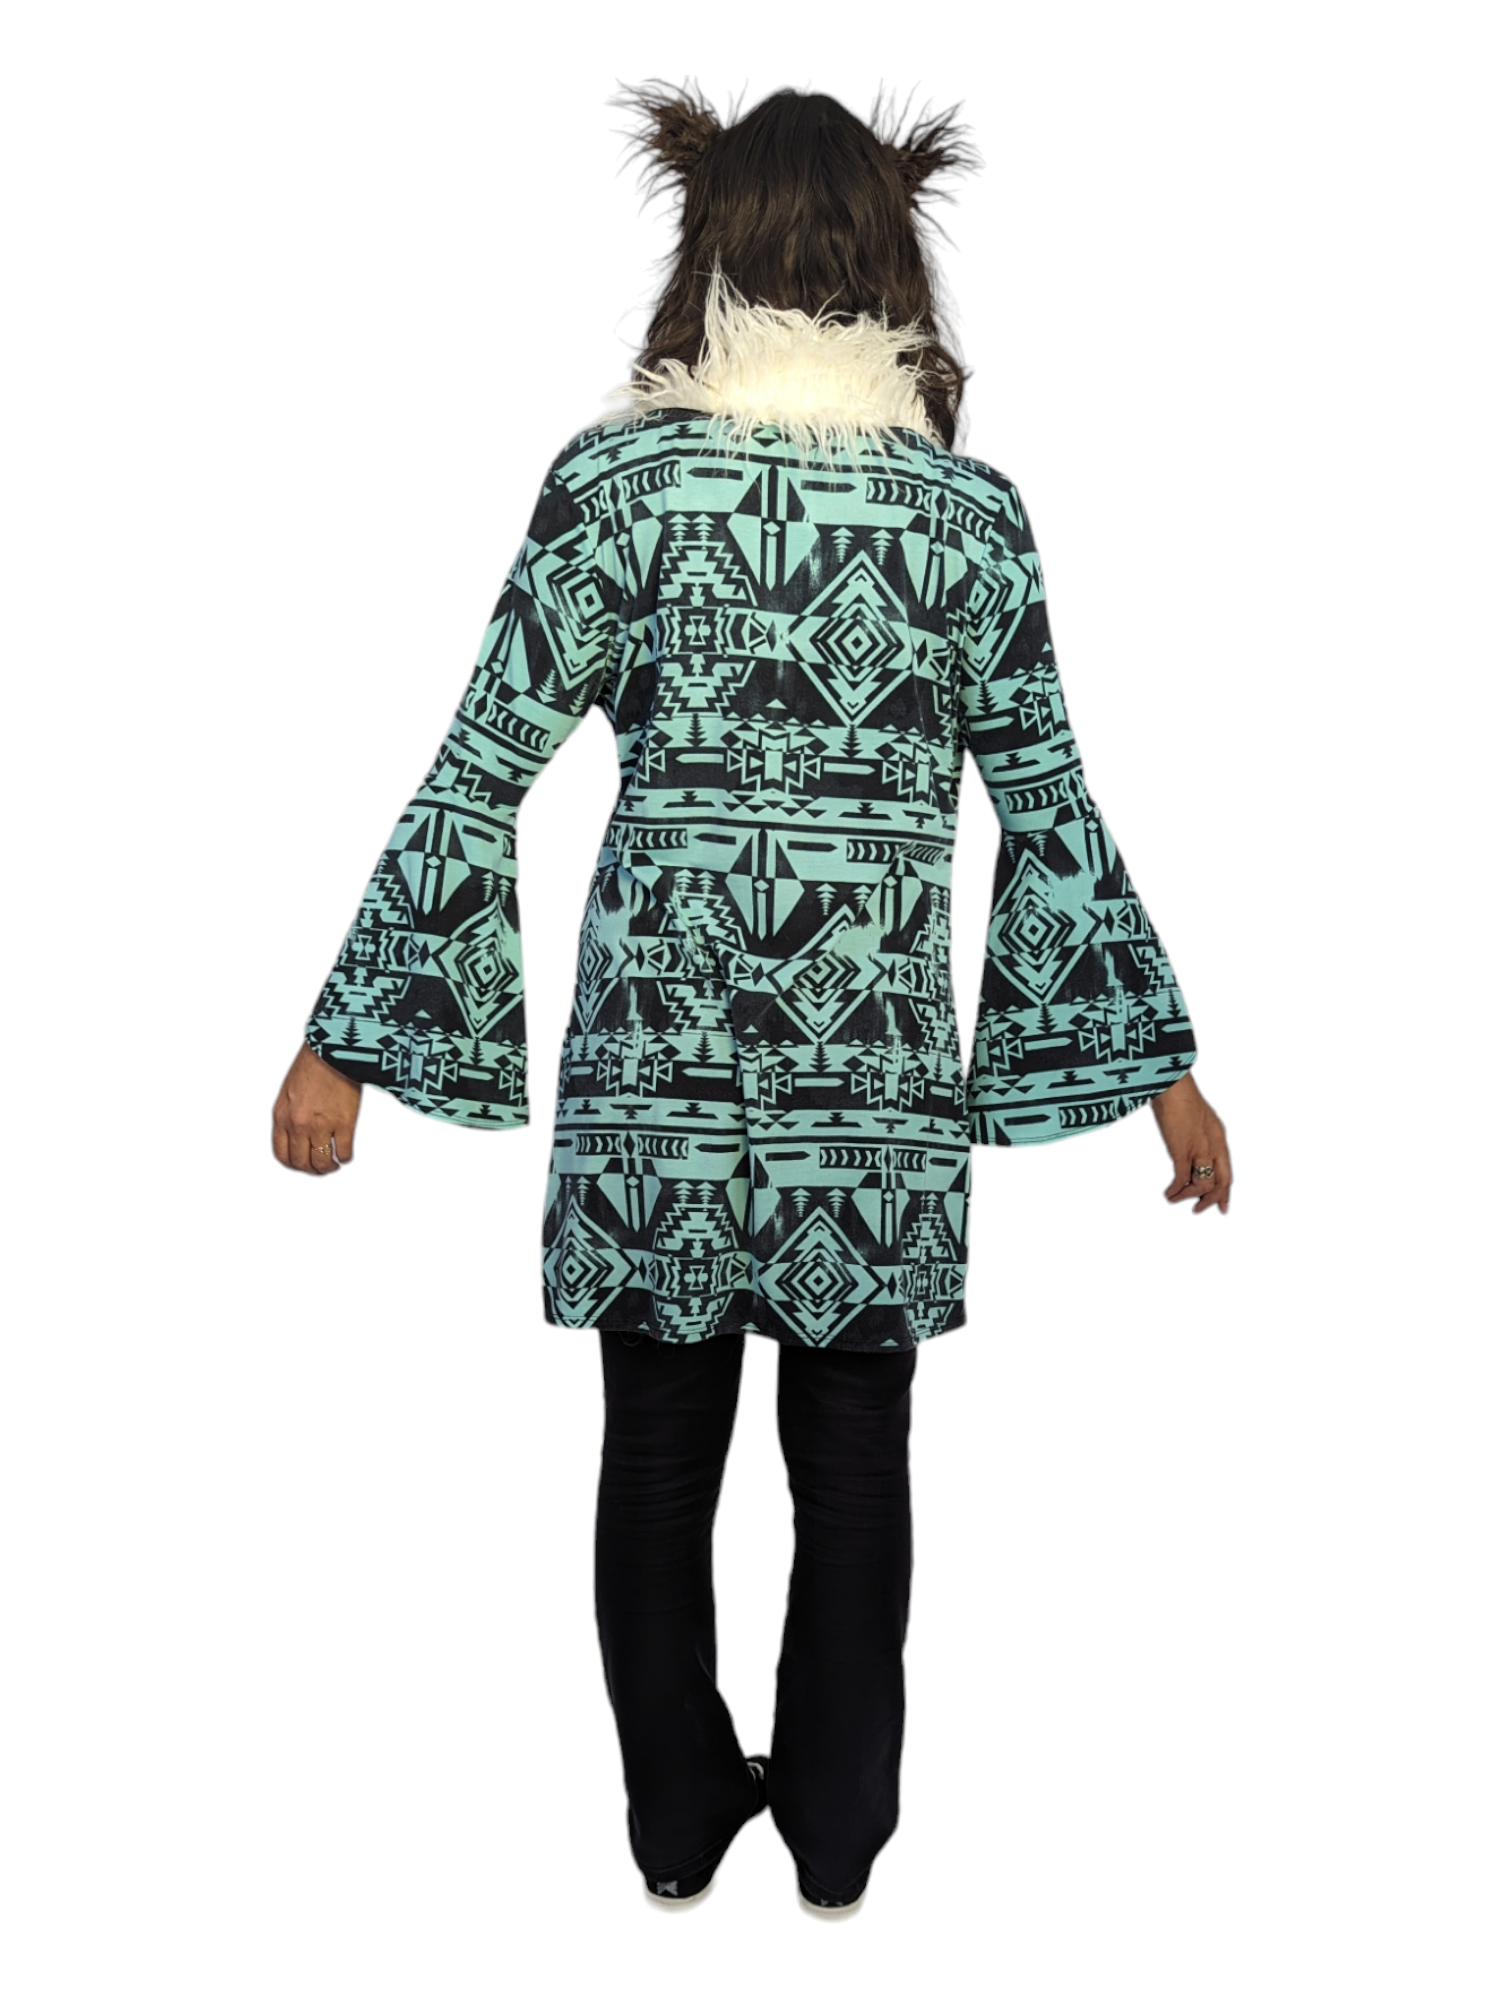 Rear view of woman wearing penny lane coat for music festivals.